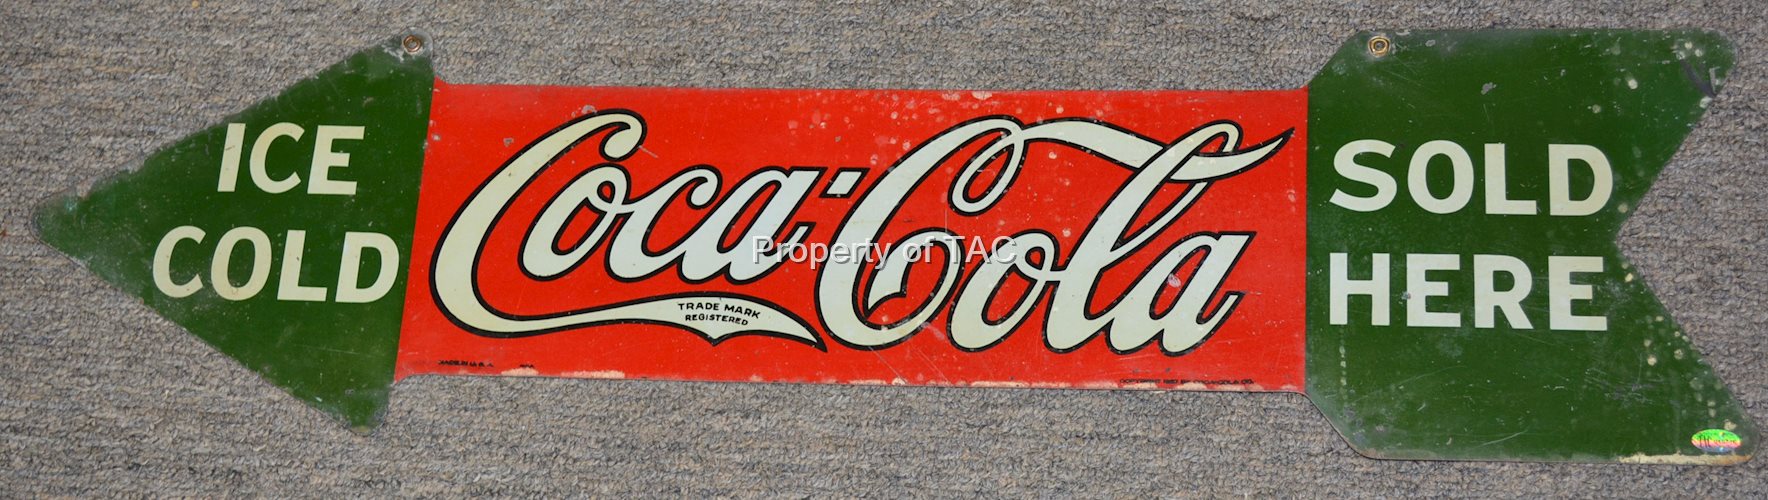 Ice Cold Coca-Cola Sold Here Arrow Shaped Metal Sign